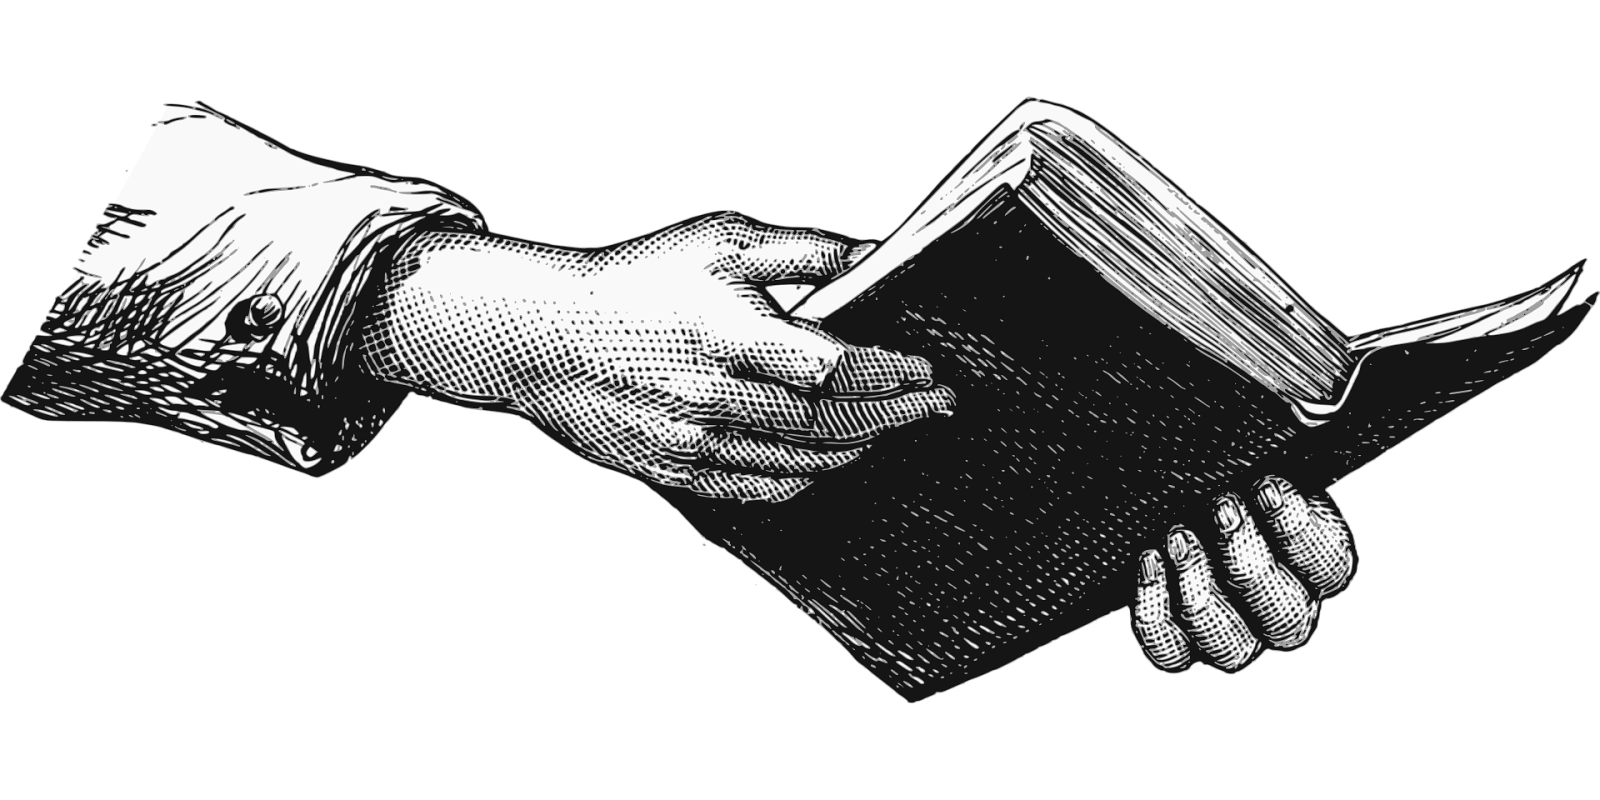 Black and white drawing of hands holding open a book